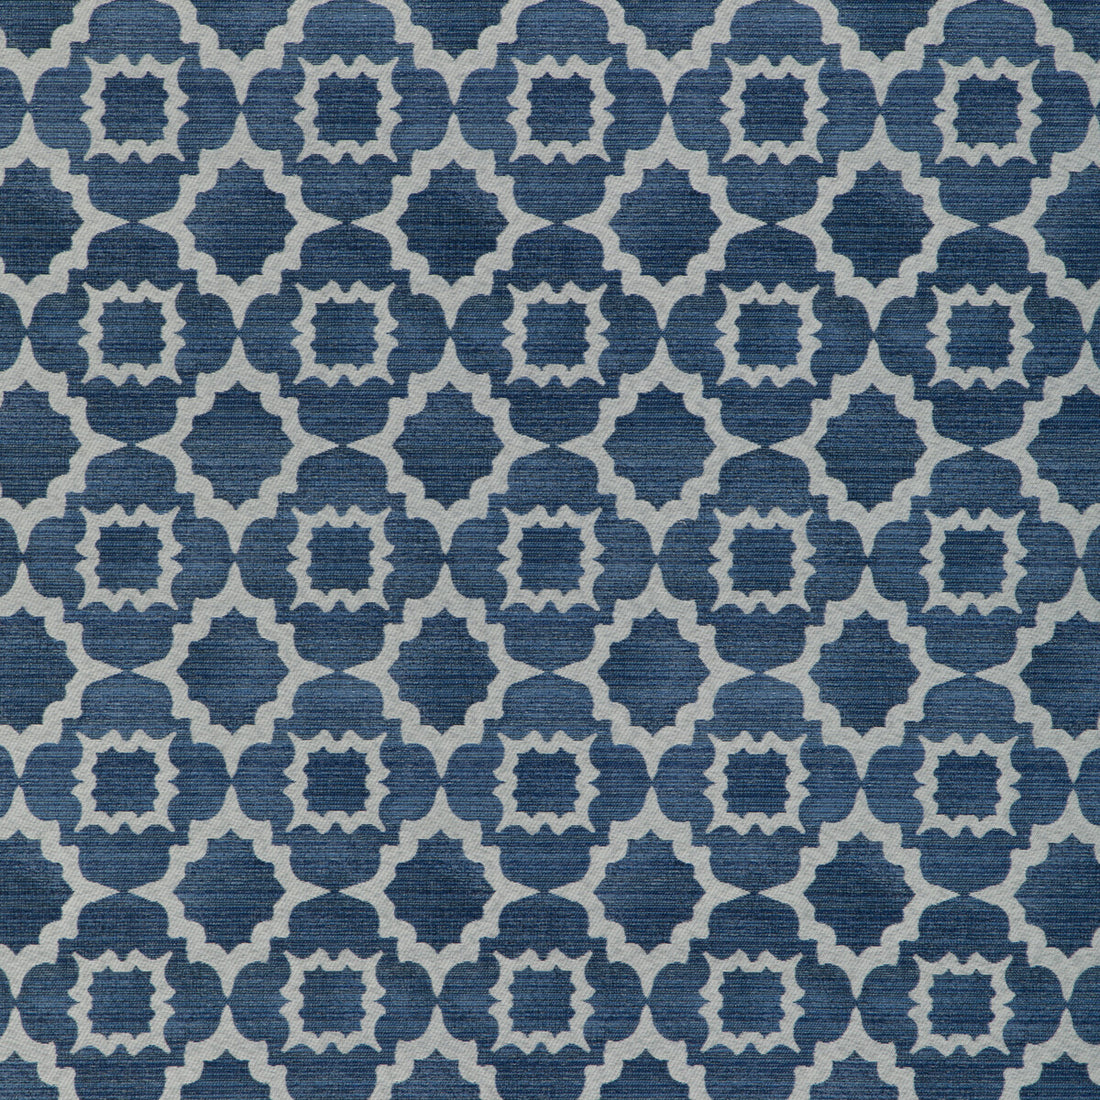 Potomac fabric in coastal color - pattern 37075.51.0 - by Kravet Contract in the Chesapeake collection